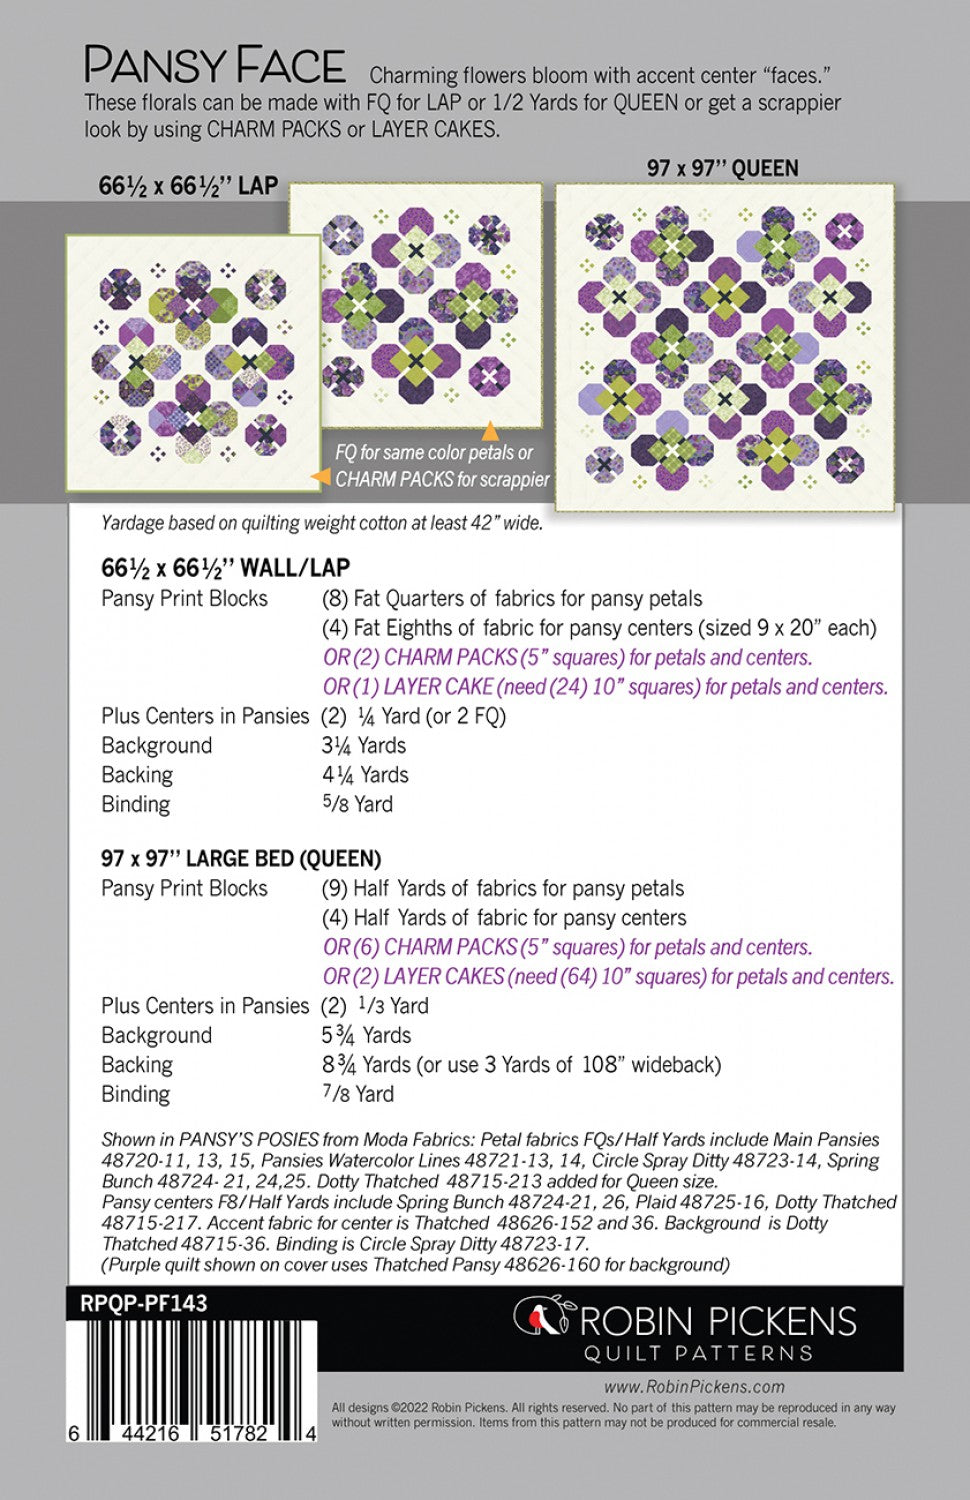 Pansy Face Quilt Pattern by Robin Pickens